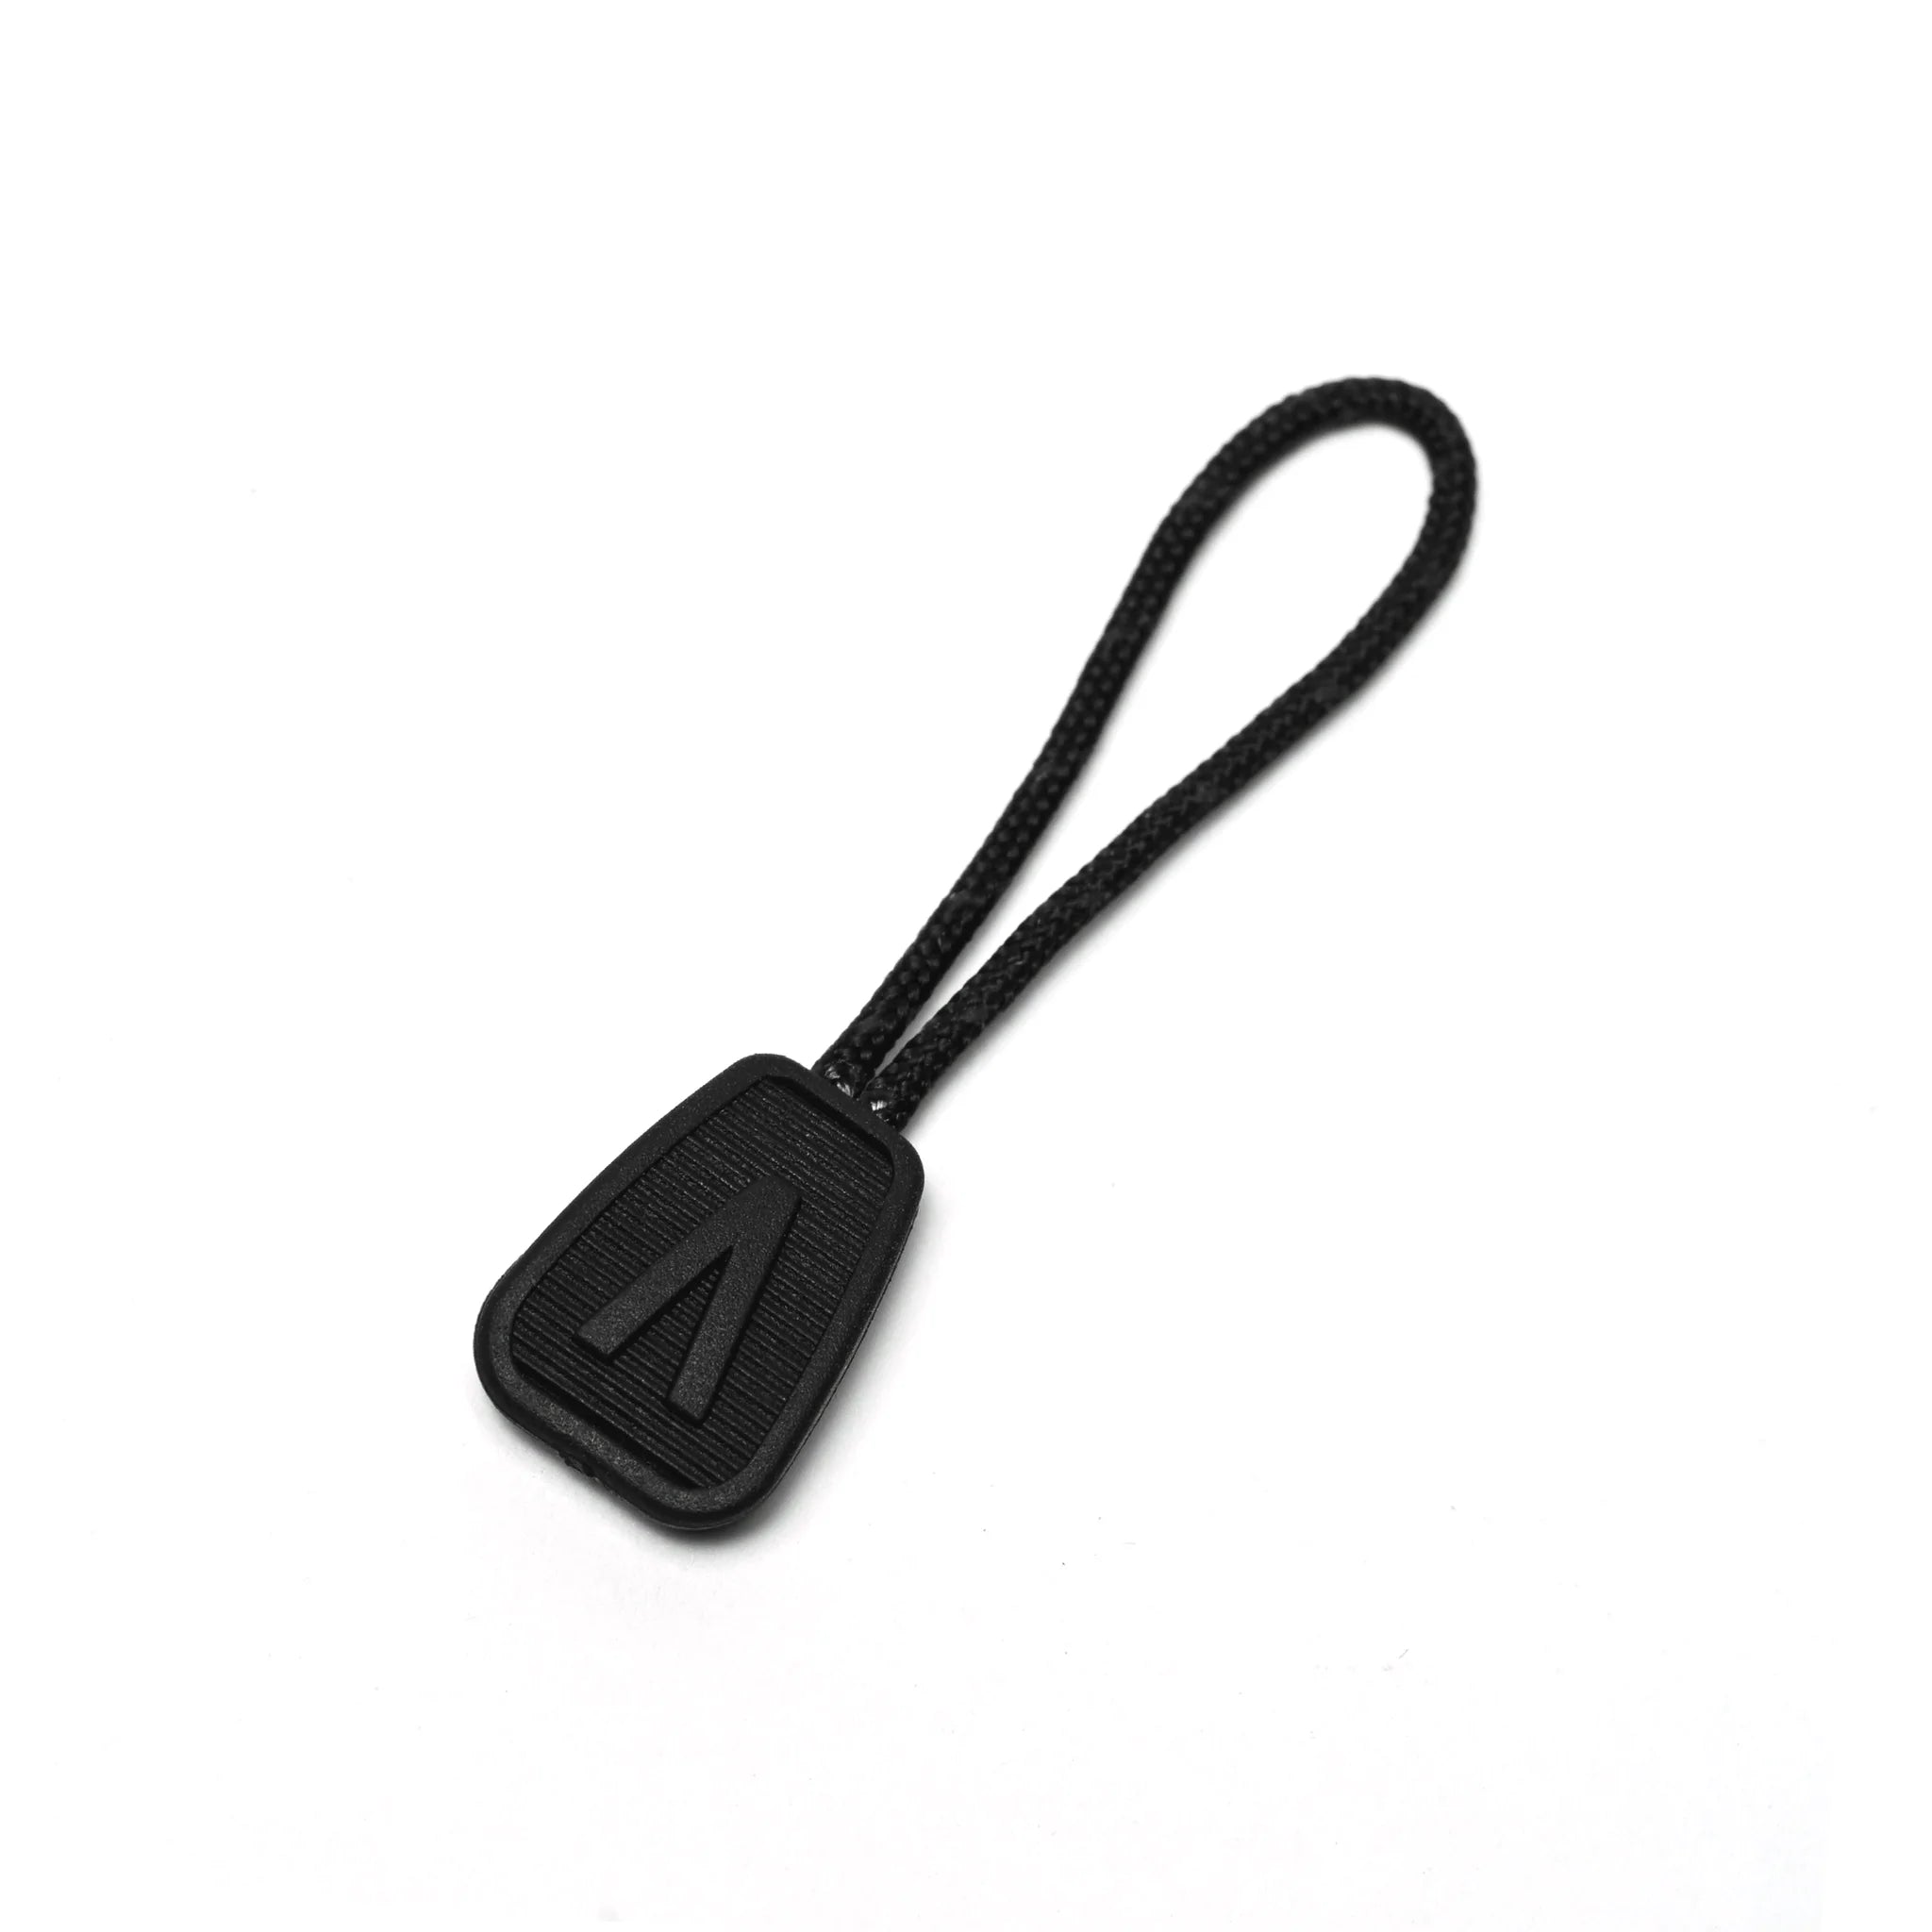 A black replacement zipper puller for a backpack.